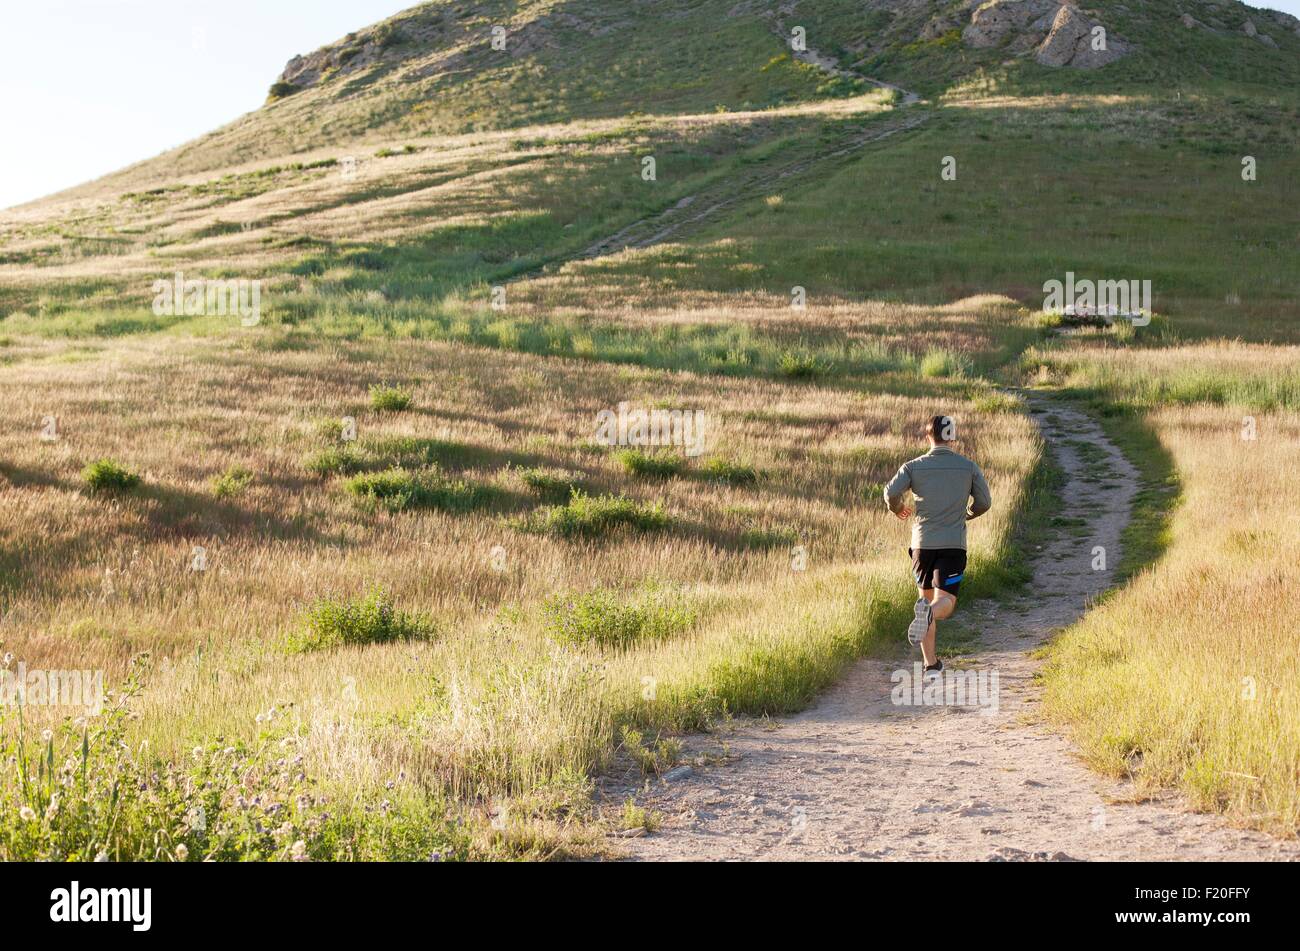 Rear view of young male runner running up hillside track Stock Photo